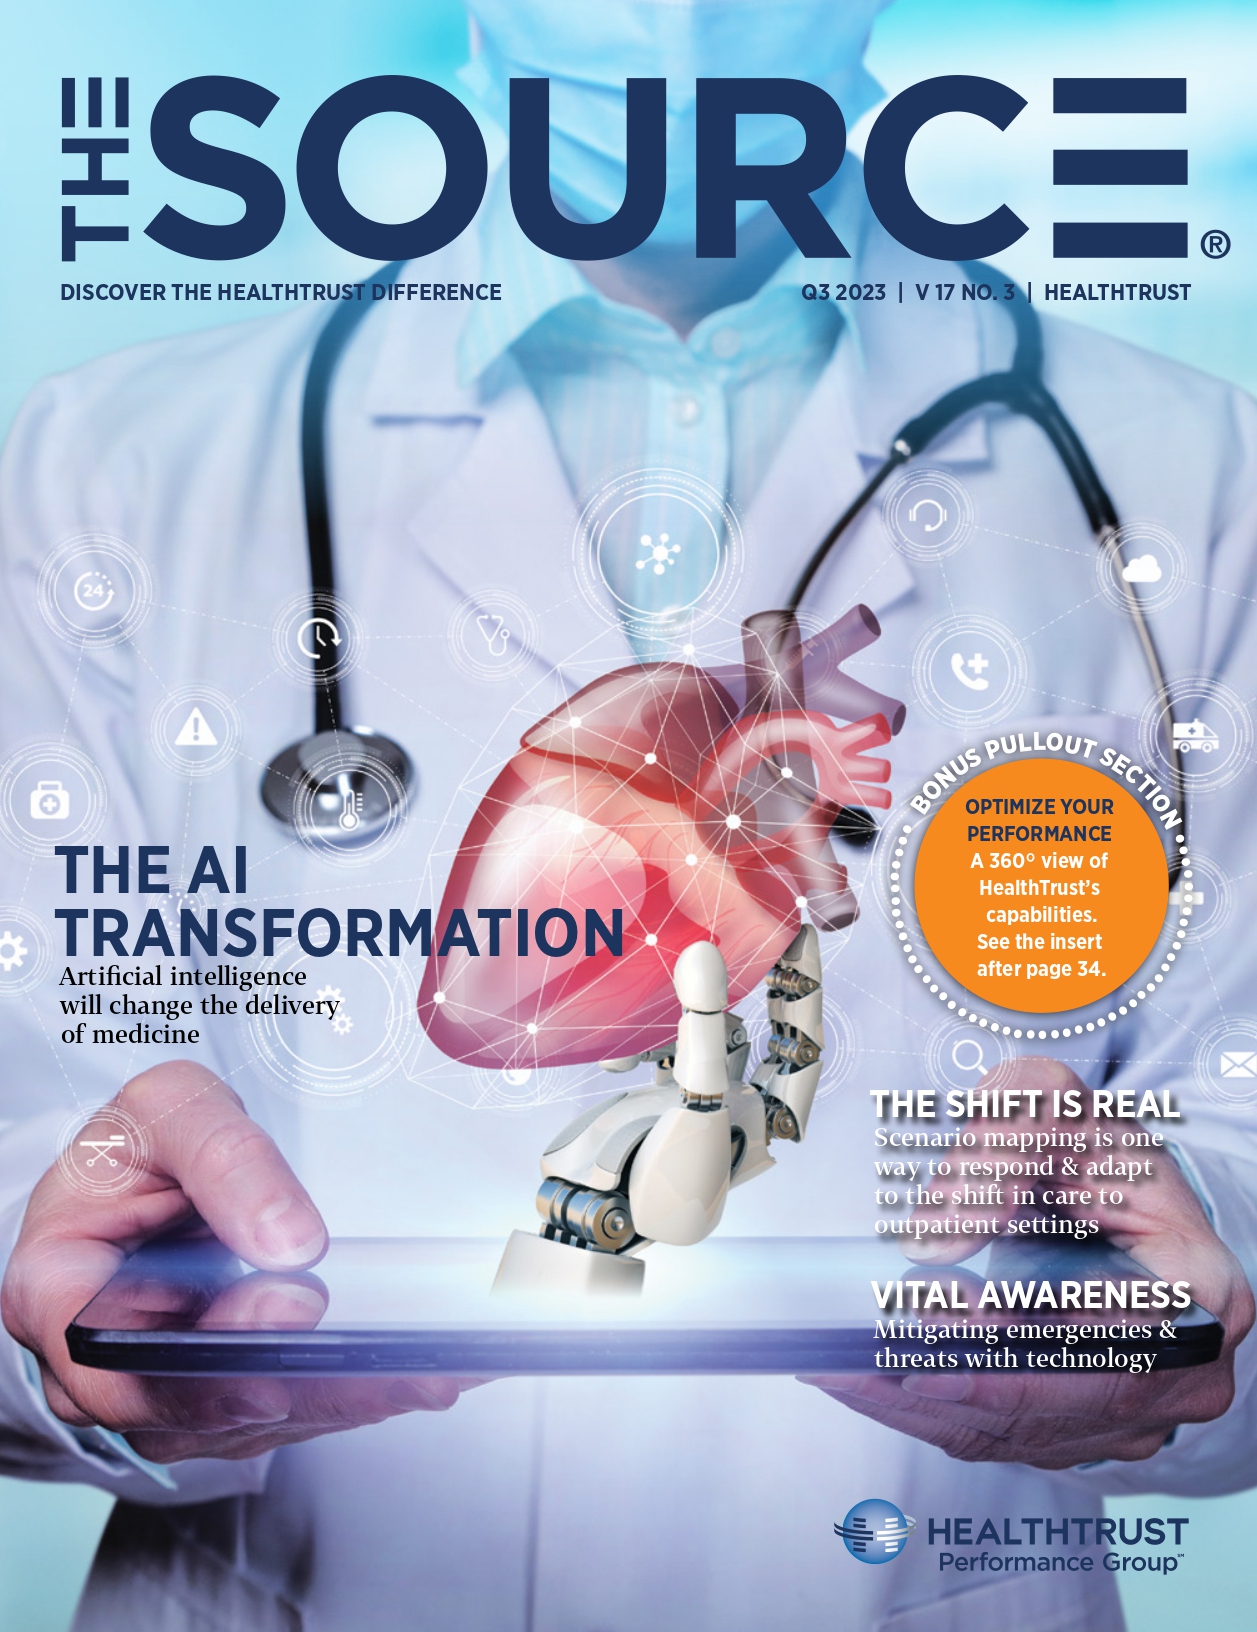 The Source - Download the Current Issue